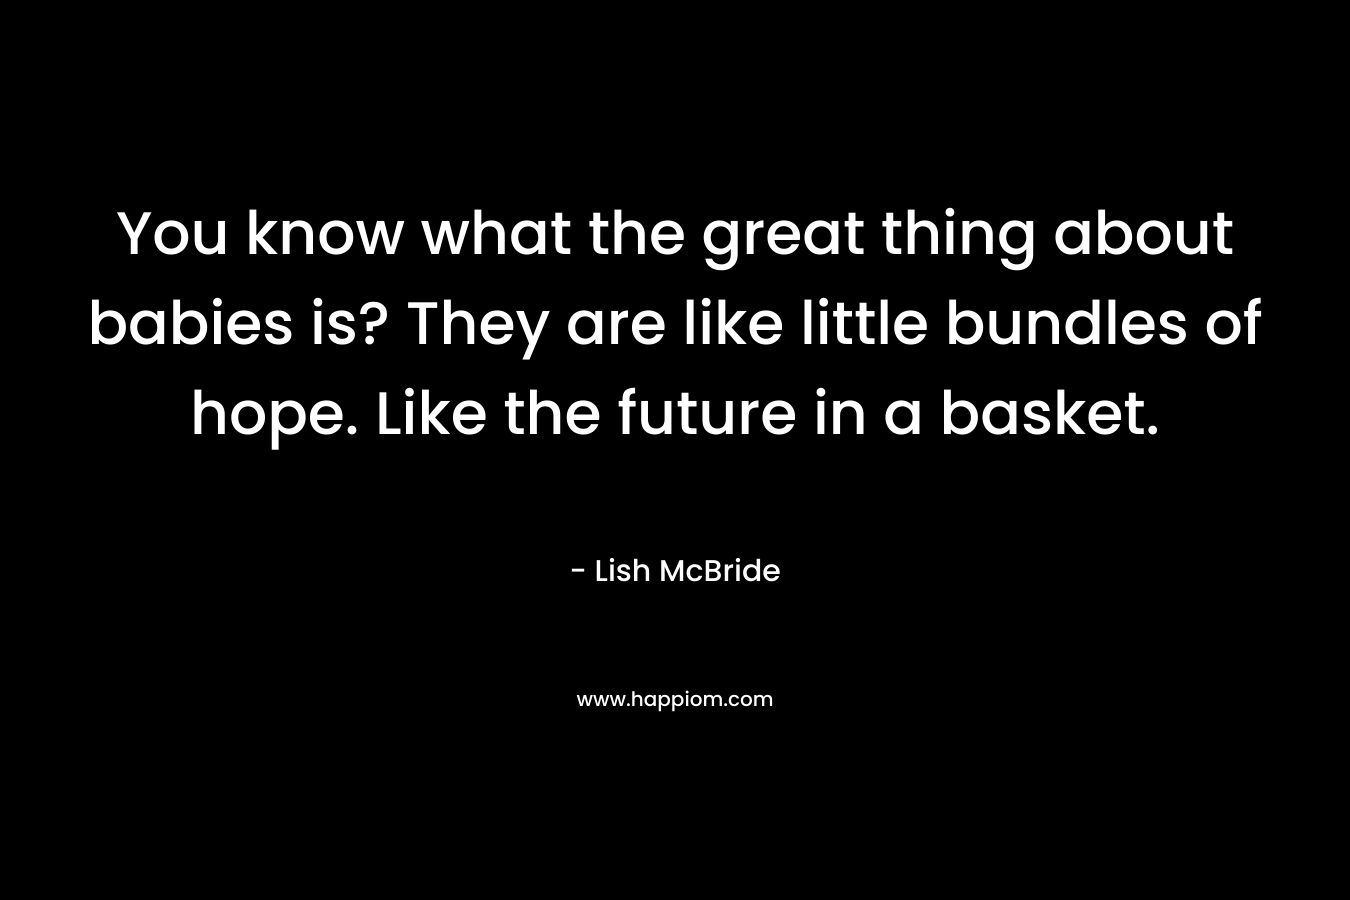 You know what the great thing about babies is? They are like little bundles of hope. Like the future in a basket. – Lish McBride